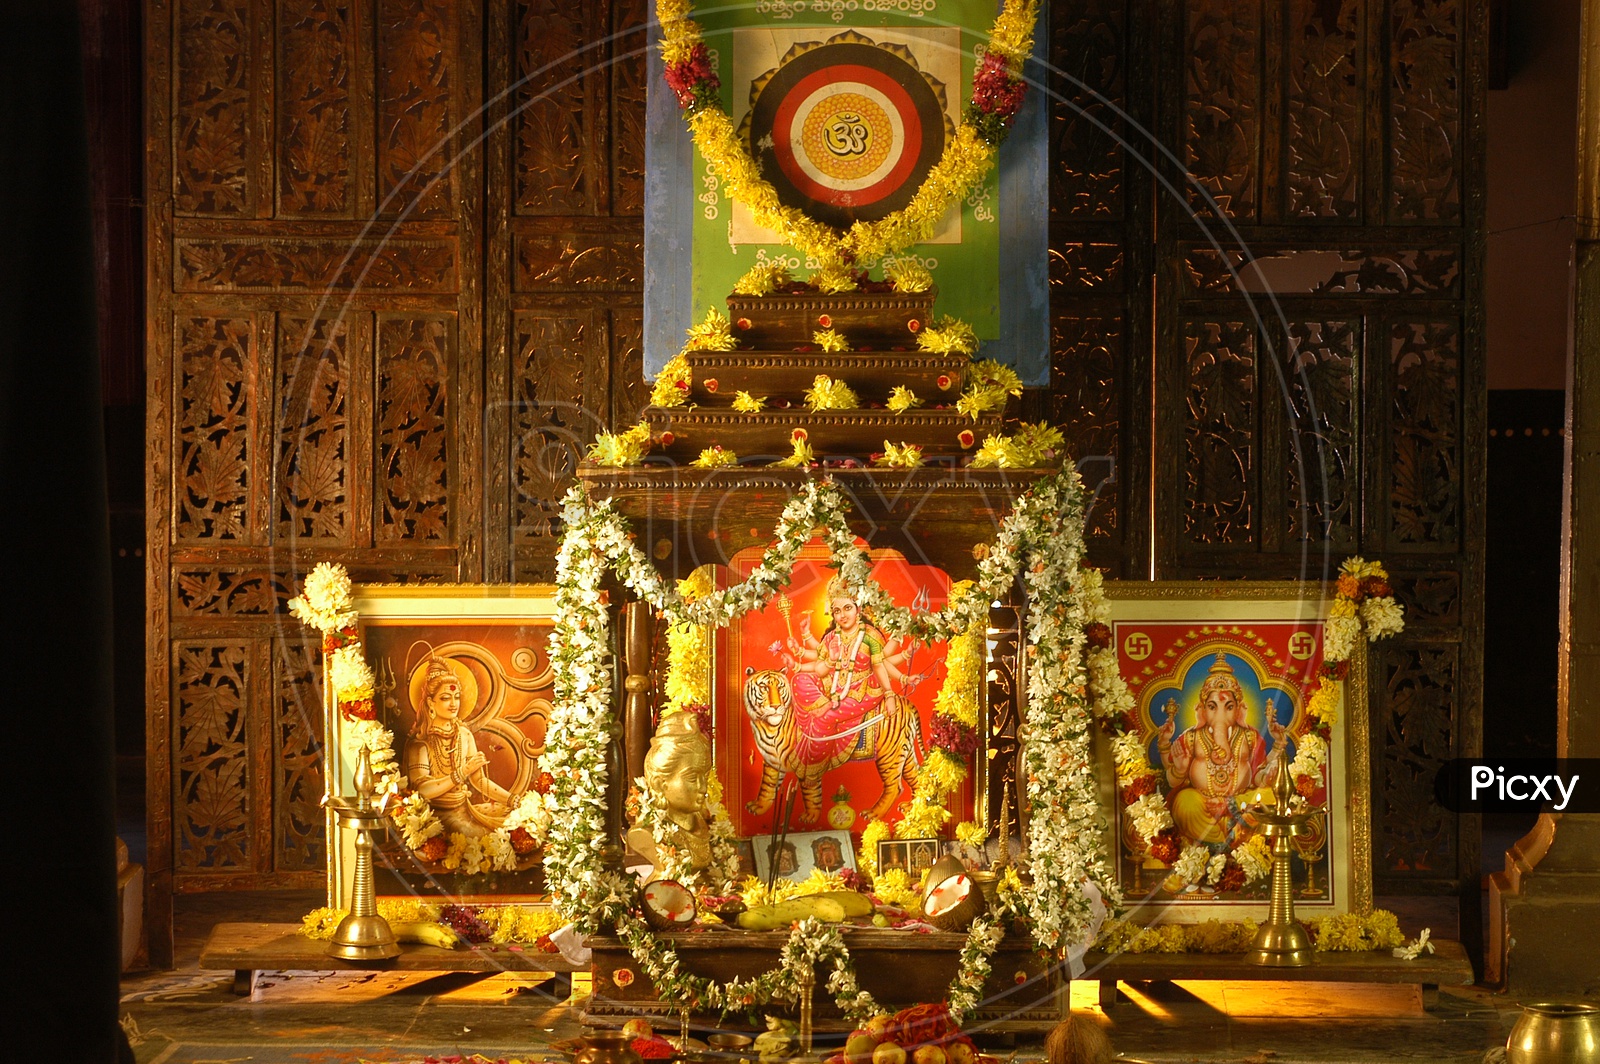 Hindu God Photos decorated with flowers and garlands